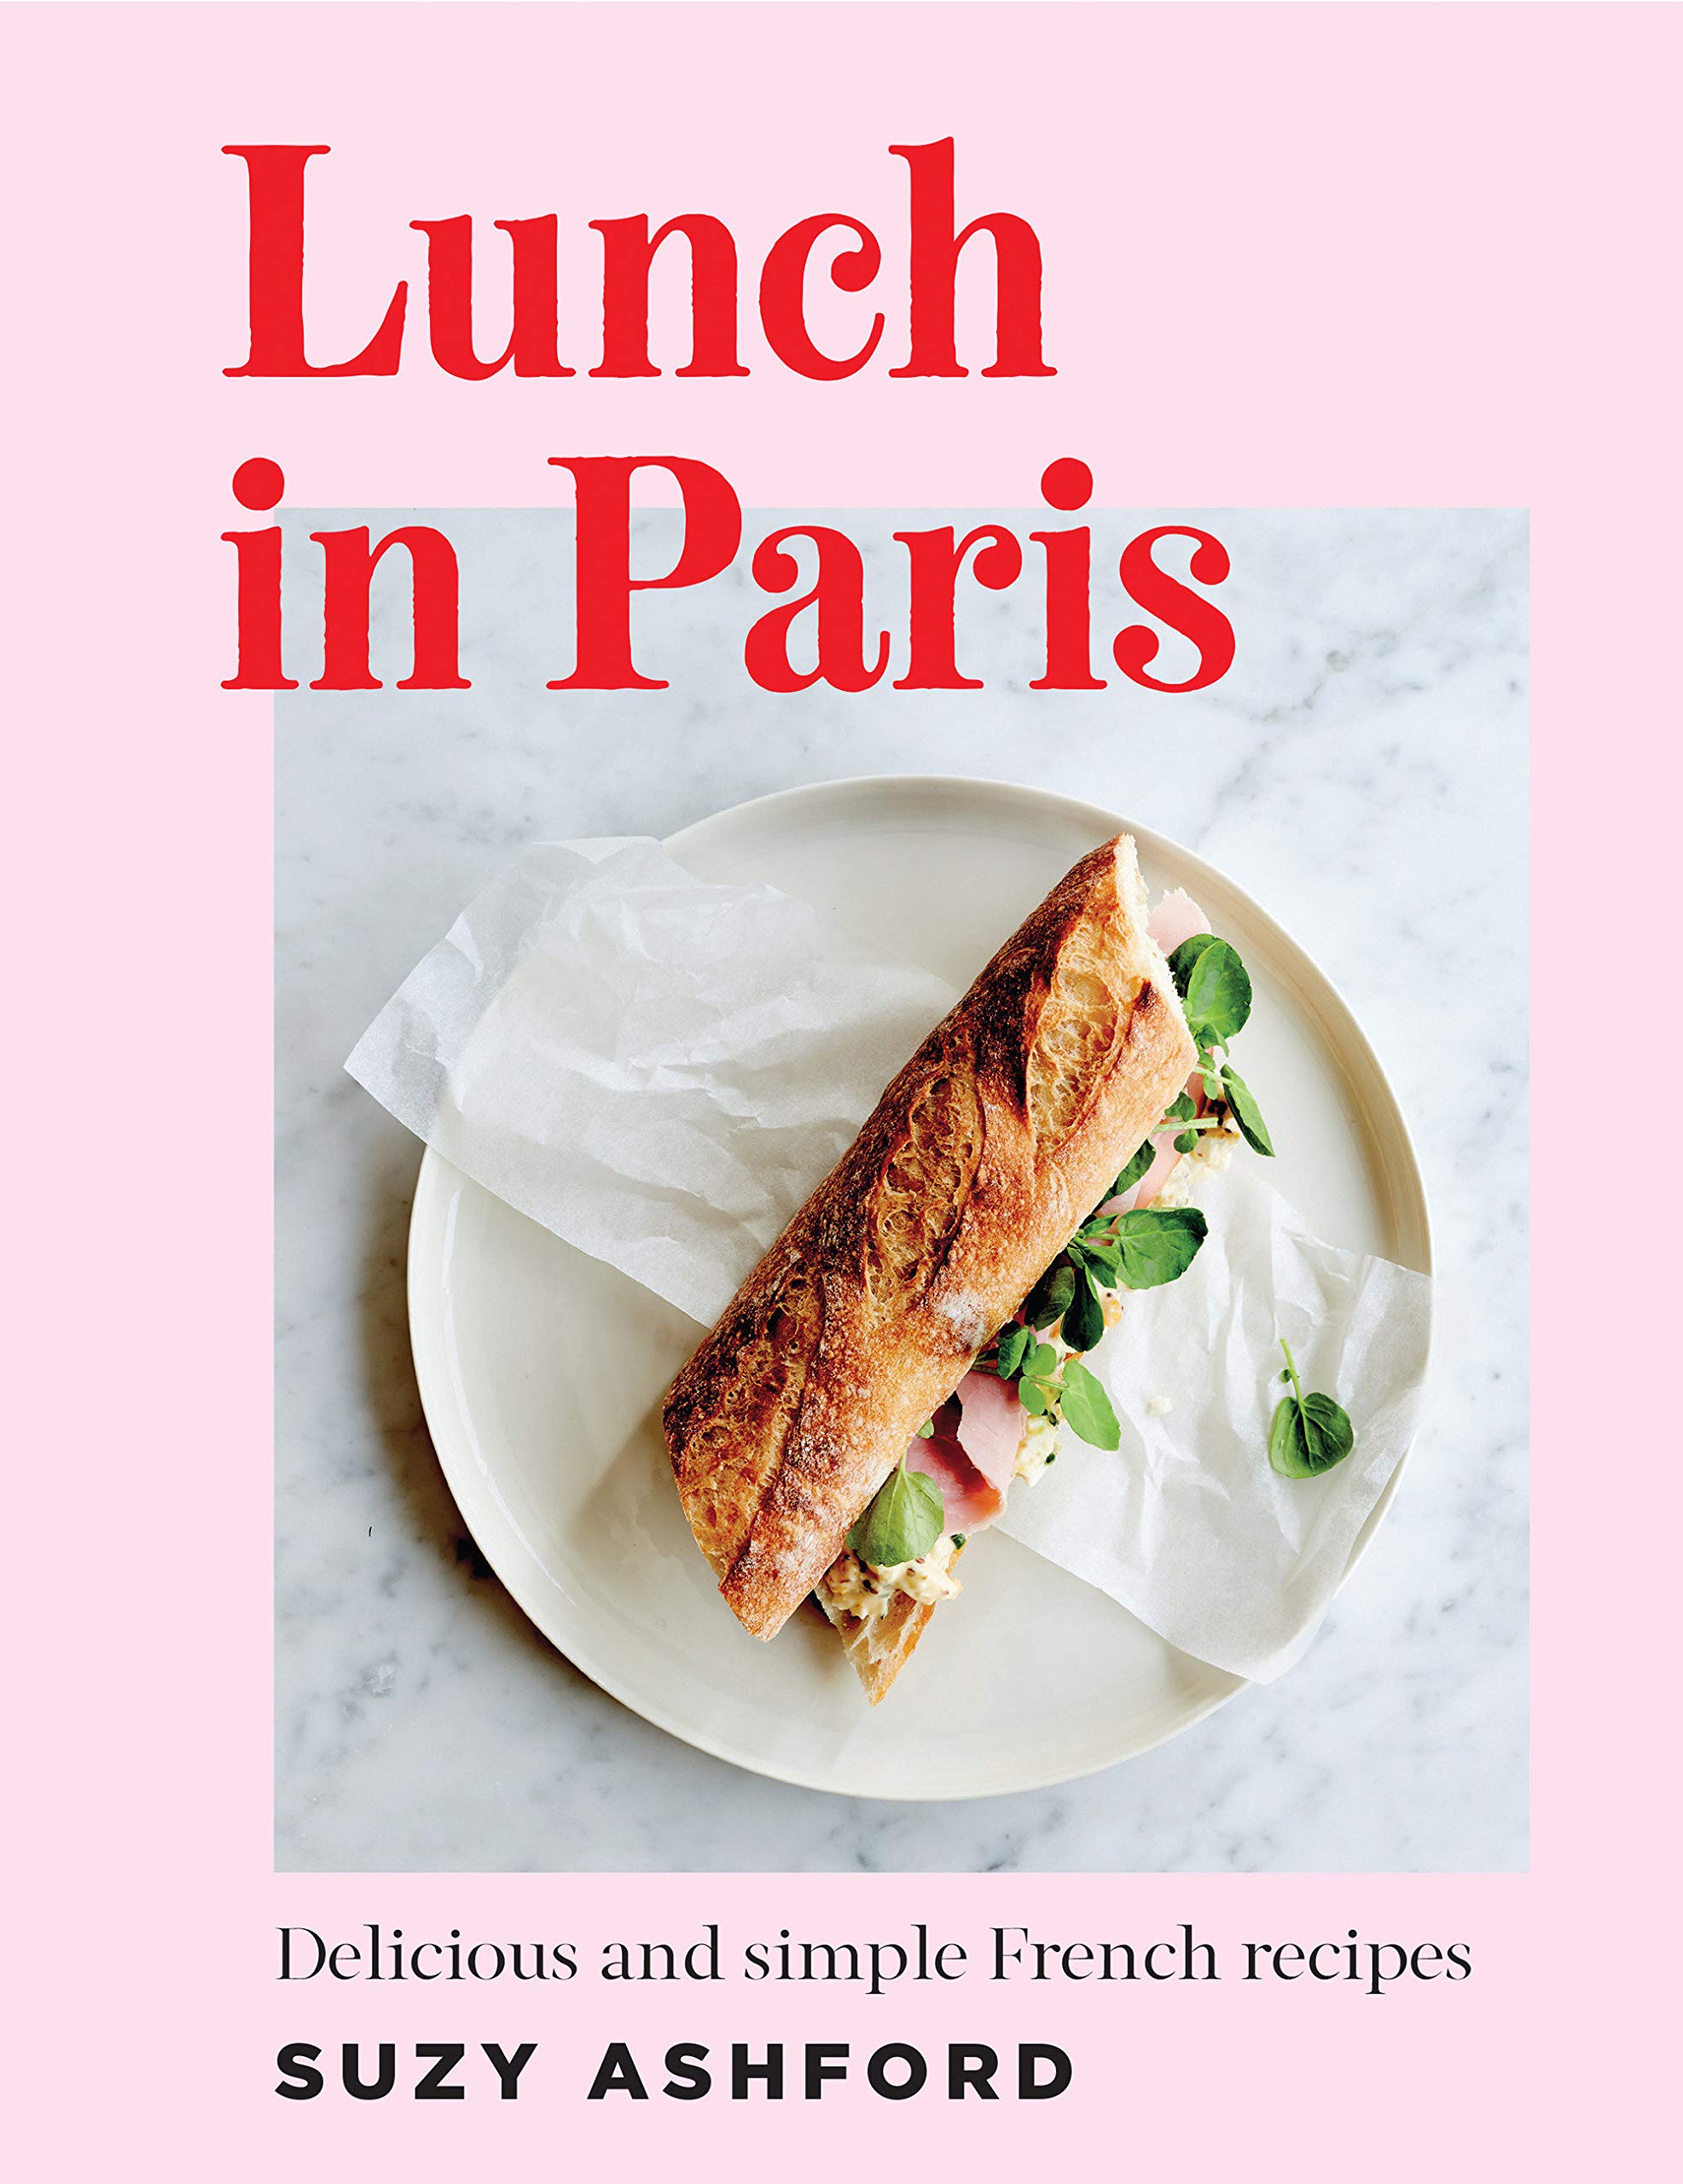 Lunch in Paris: Delicious and Simple French Recipes